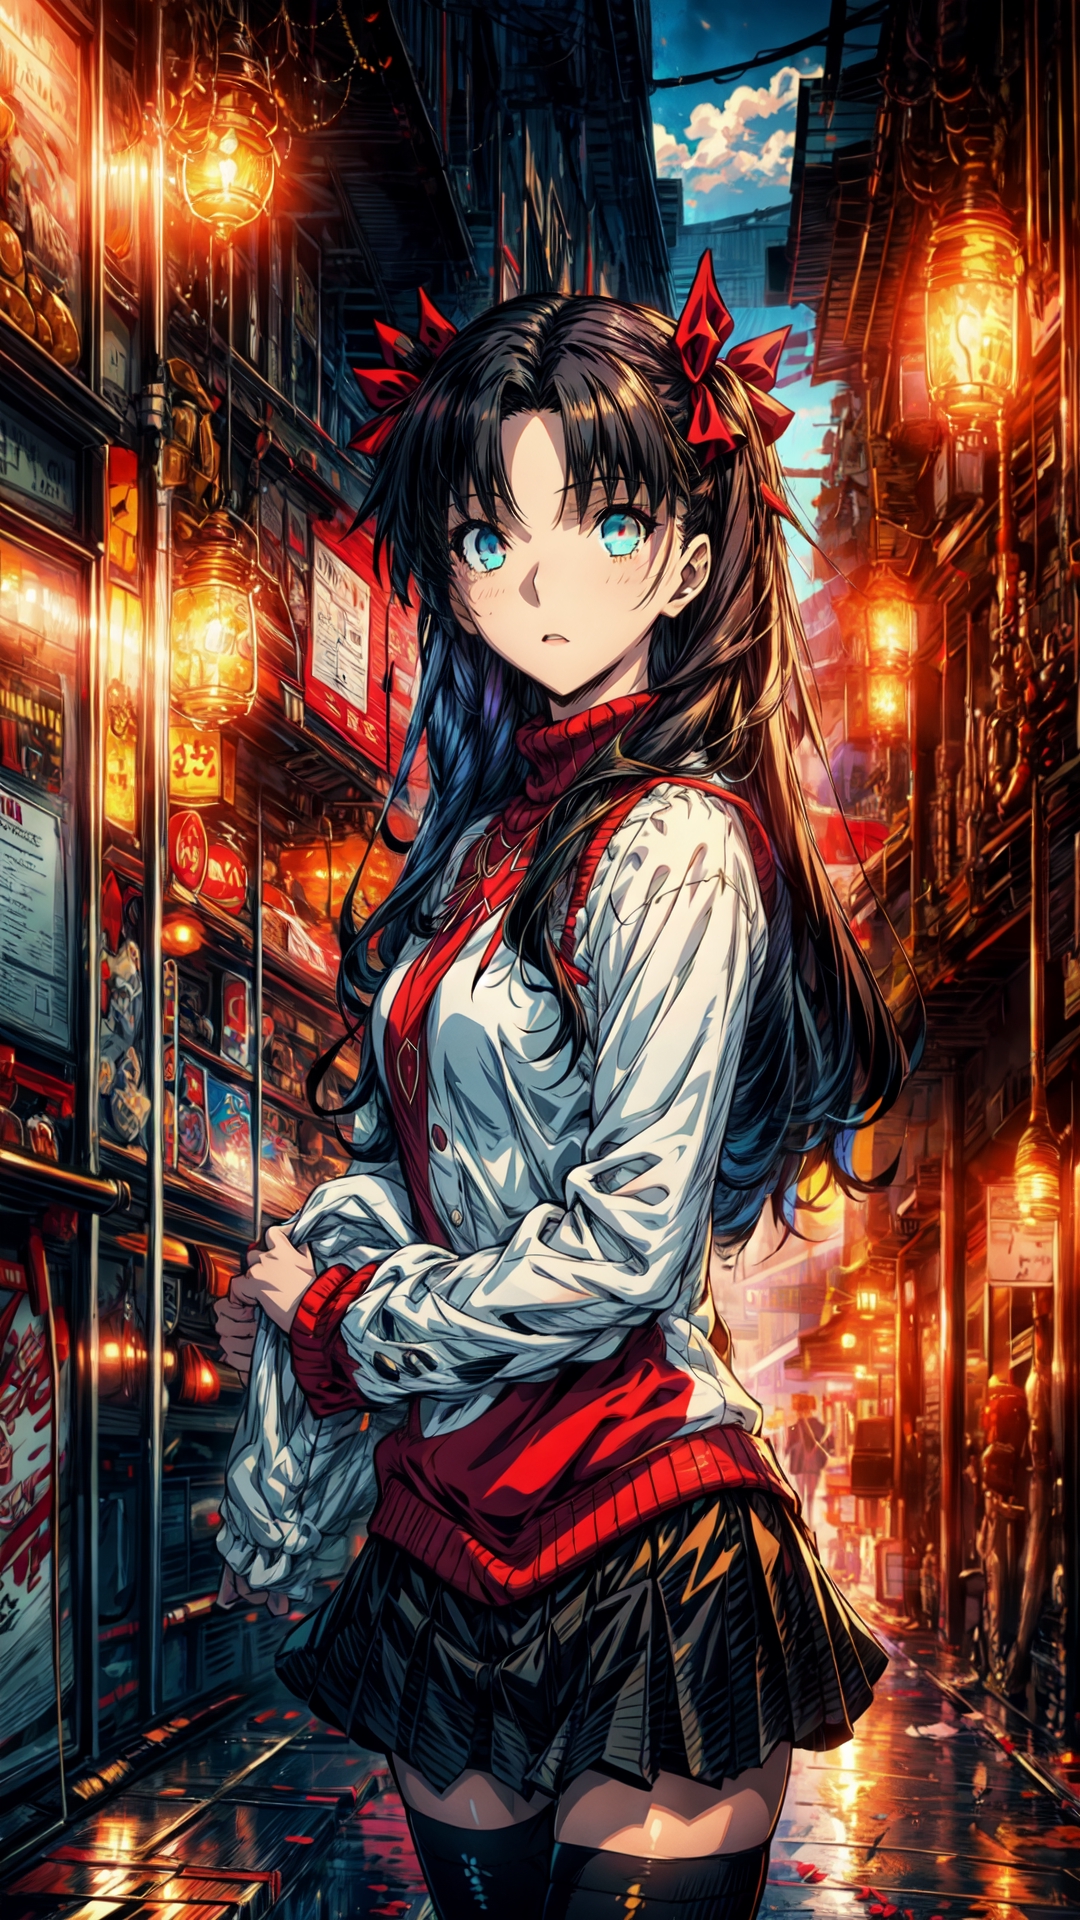 Tohsaka Rin  Fate/stay night: Unlimited Blade Works - v1.0